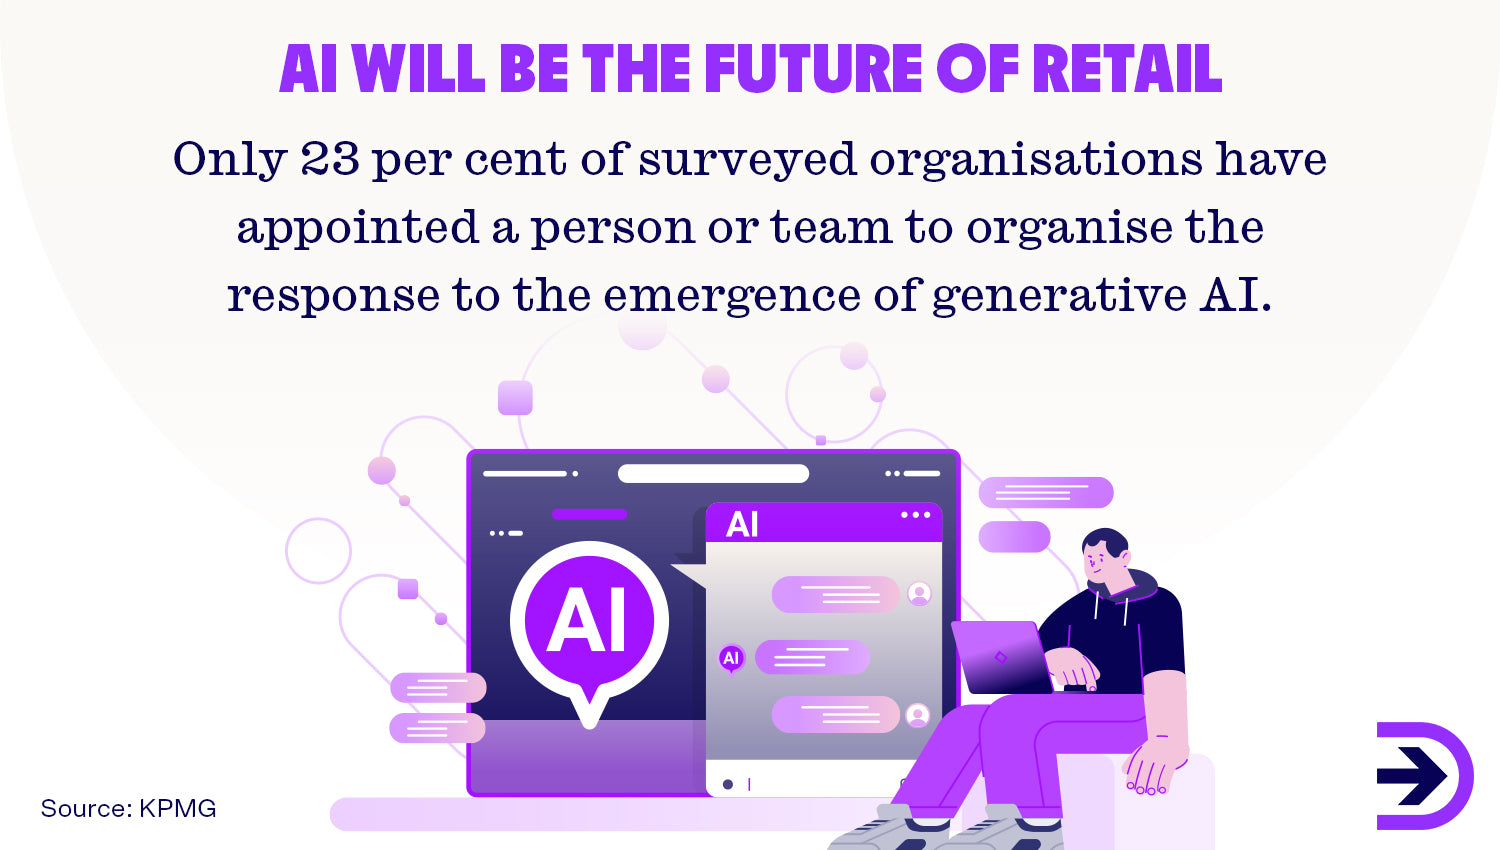 Get ahead of the retail game and appoint a person or a team to optimise your business with the help of generative AI.